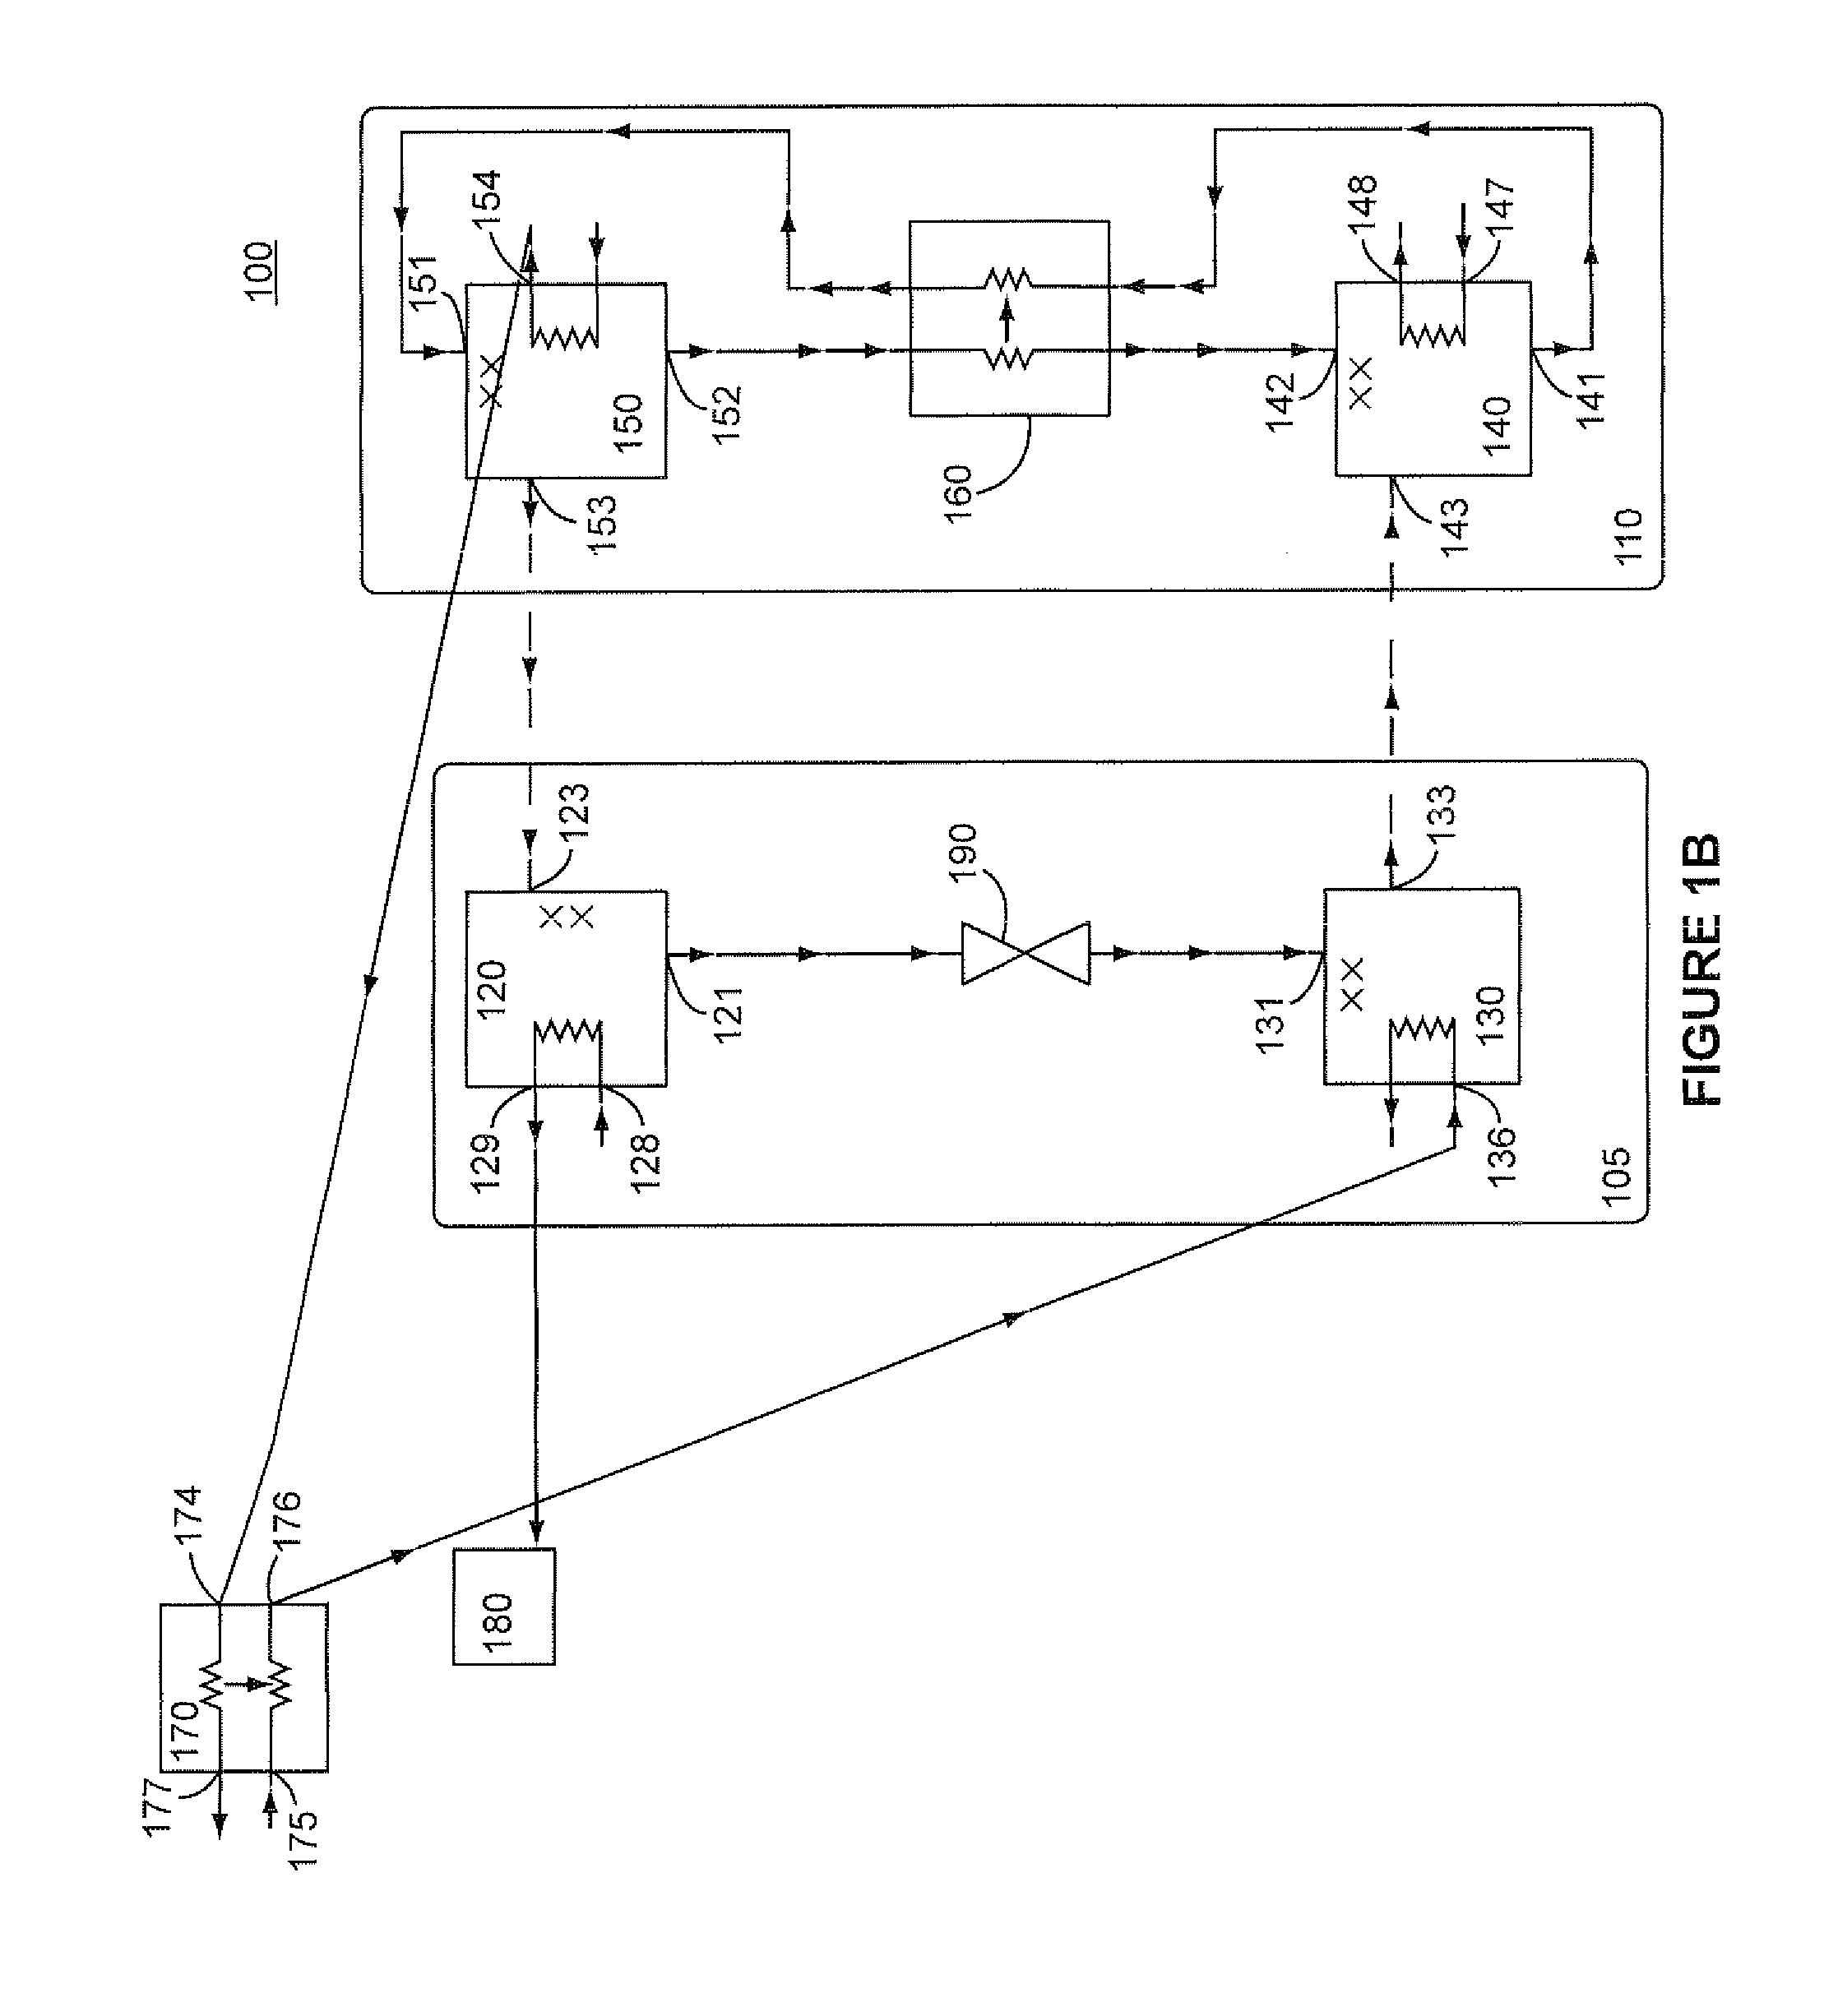 Absorption heat pump system and method of using the same